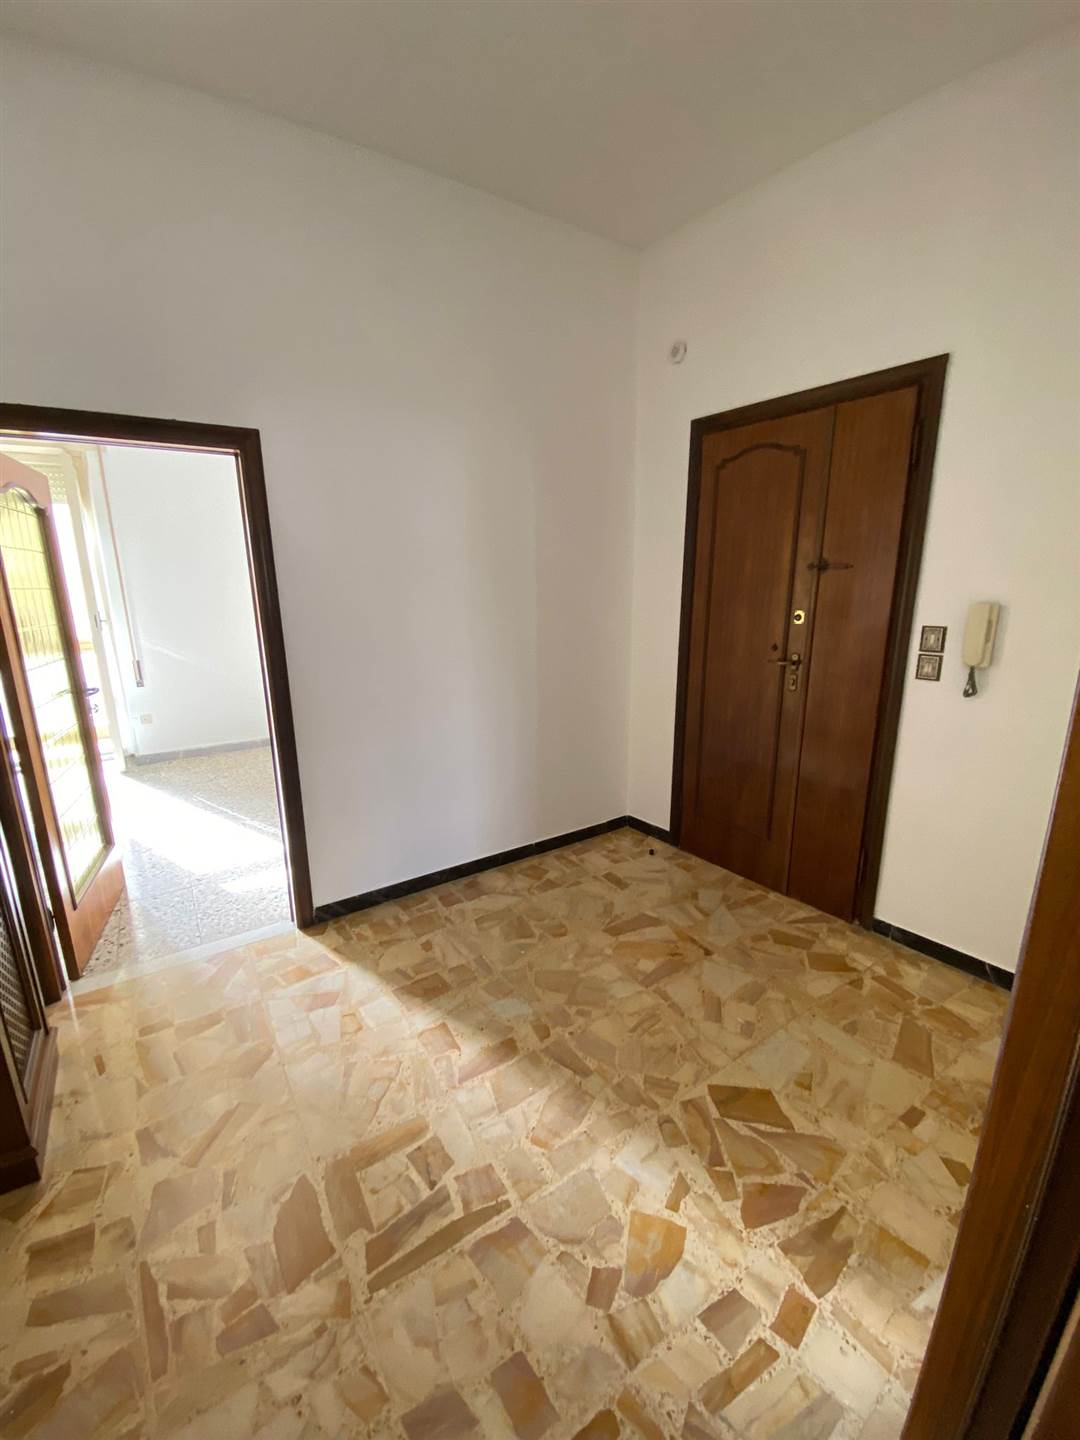 REGIONI, GROSSETO, Apartment for sale of 127 Sq. mt., Be restored, Heating Individual heating system, Energetic class: G, placed at 1° on 5, composed 